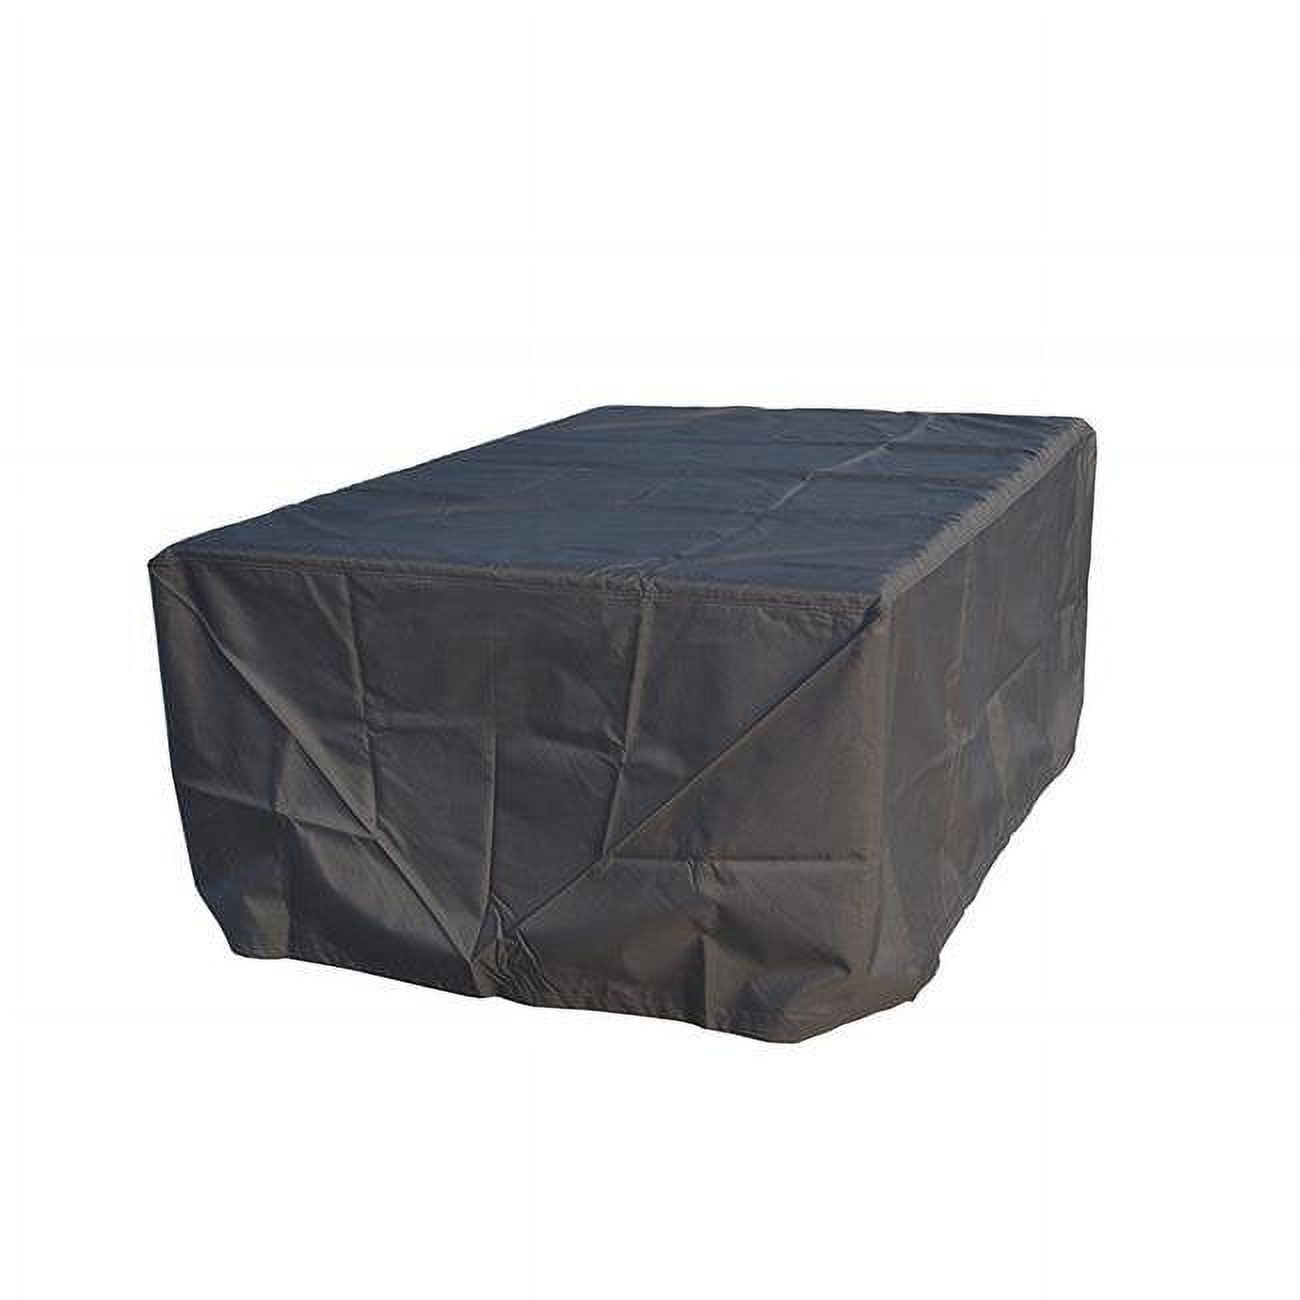 RC-1120 Durable & Water Resistant Outdoor Furniture Cover for Bench, Loveseat & Sofa, Black - 106 x 106 x 28 in -  Direct Wicker